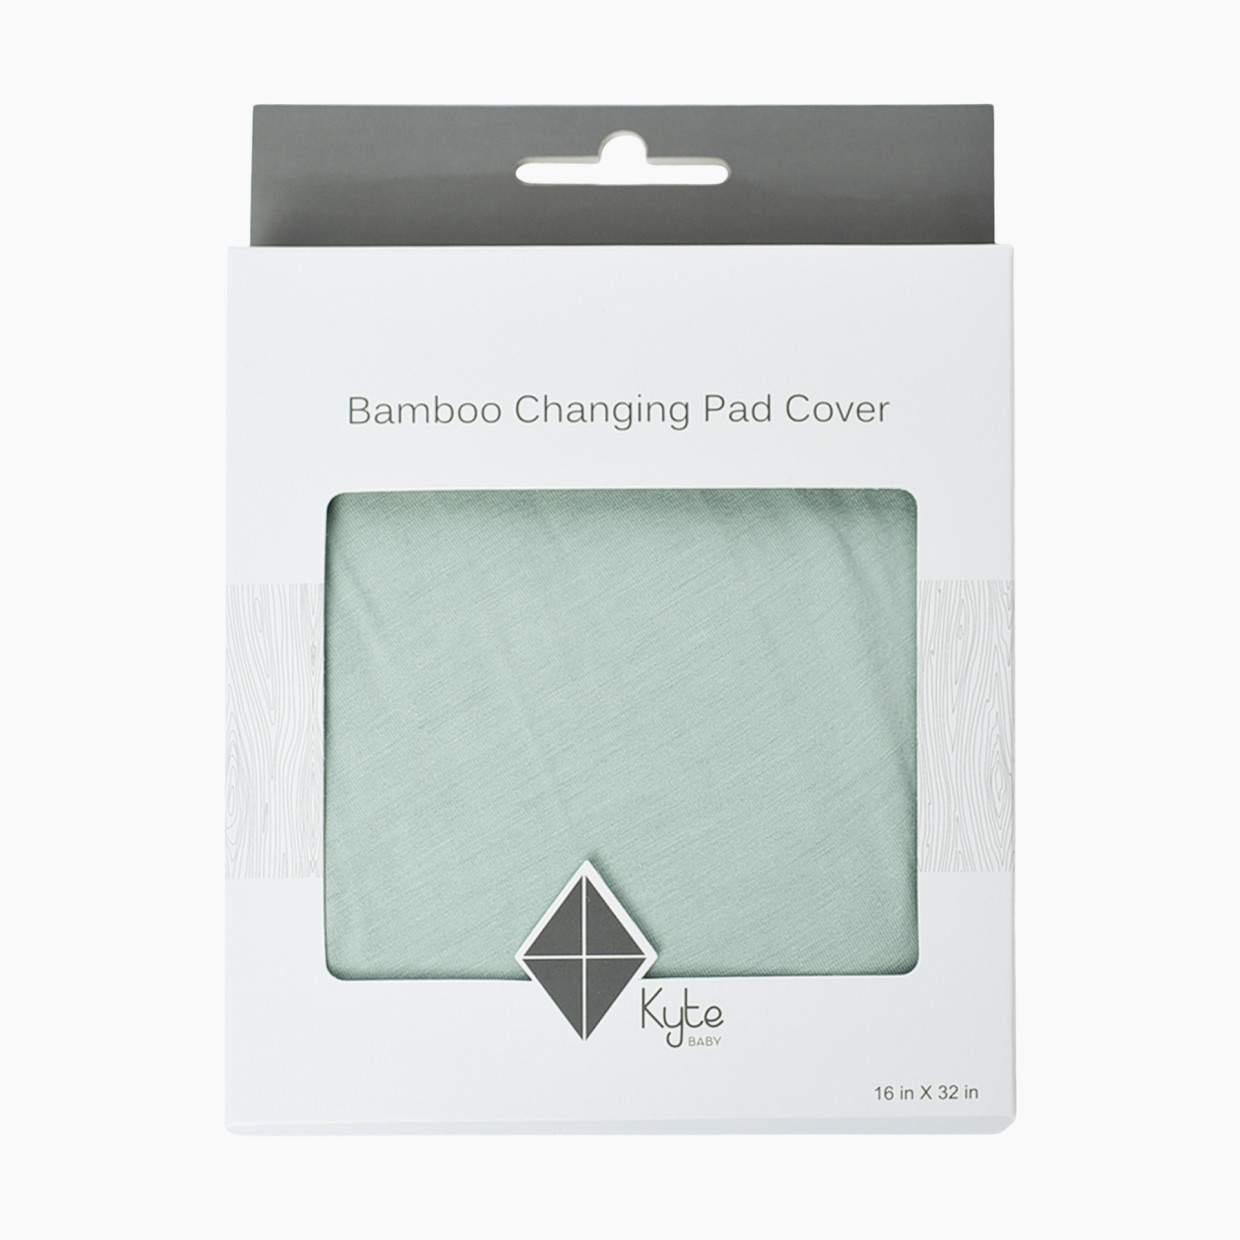 Kyte Baby Changing Pad Cover - Sage.